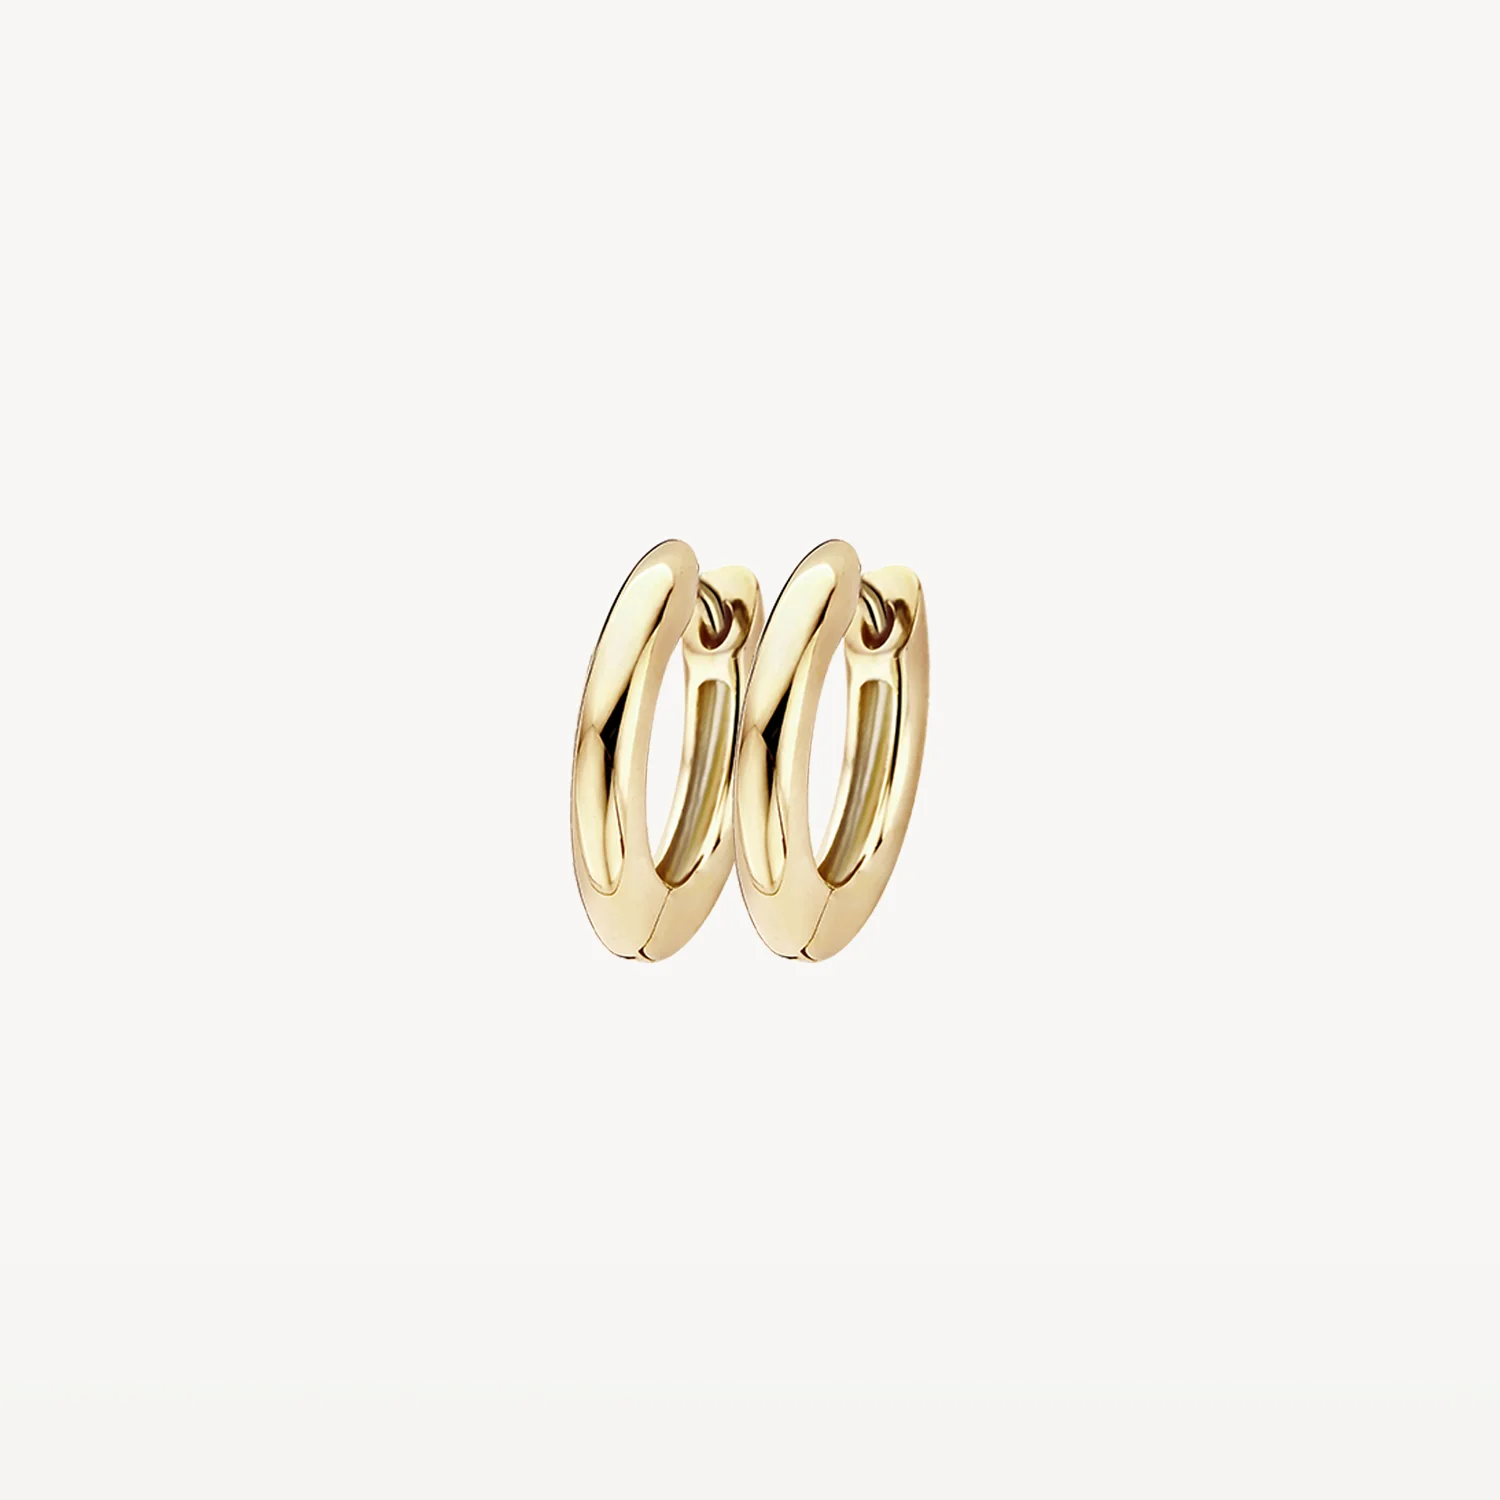 Blush Yellow Gold Hoop Earrings - Small 13mm